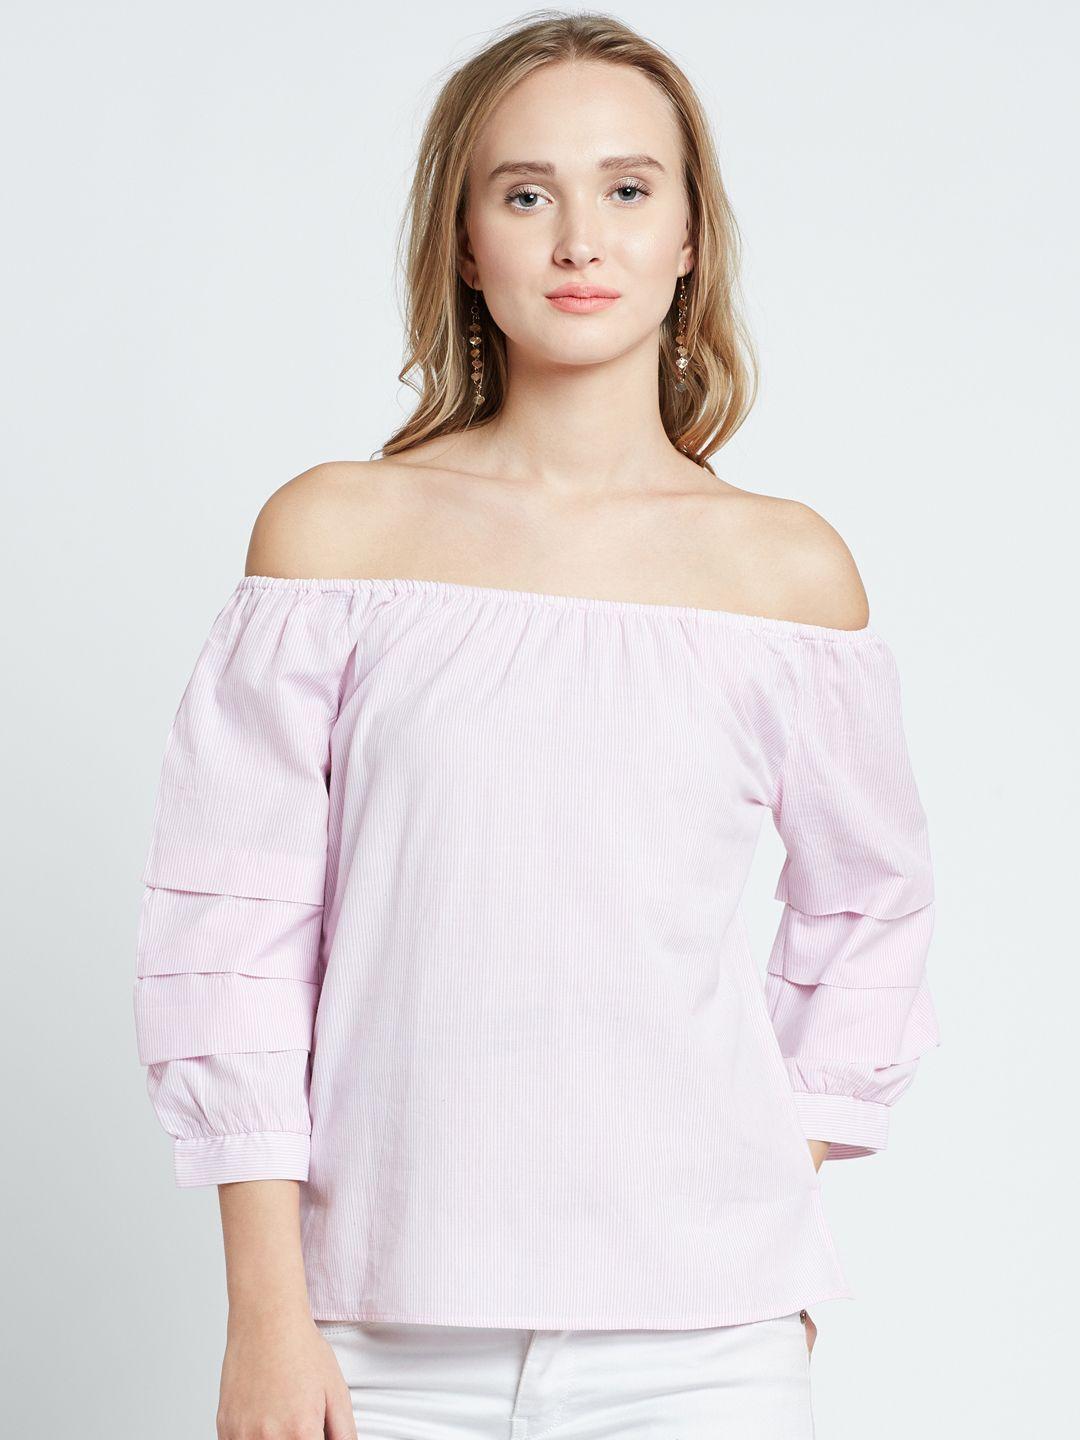 marie-claire-women-pink-&-white-striped-bardot-top